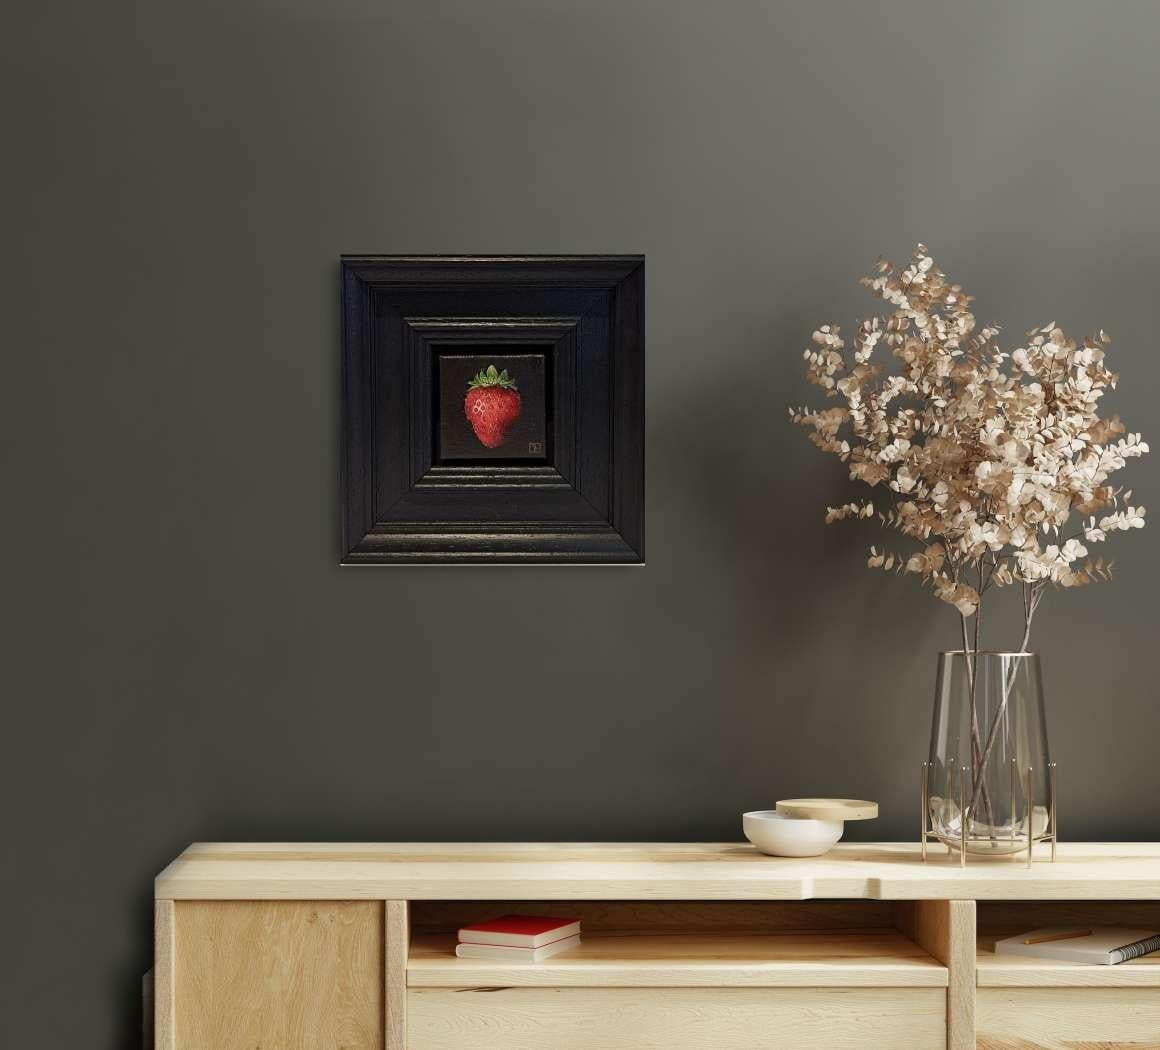 Pocket Crimson Strawberry 2 c is an original oil painting by Dani Humberstone as part of her Pocket Painting series featuring small scale realistic oil paintings, with a nod to baroque still life painting. The paintings are set in a black wood